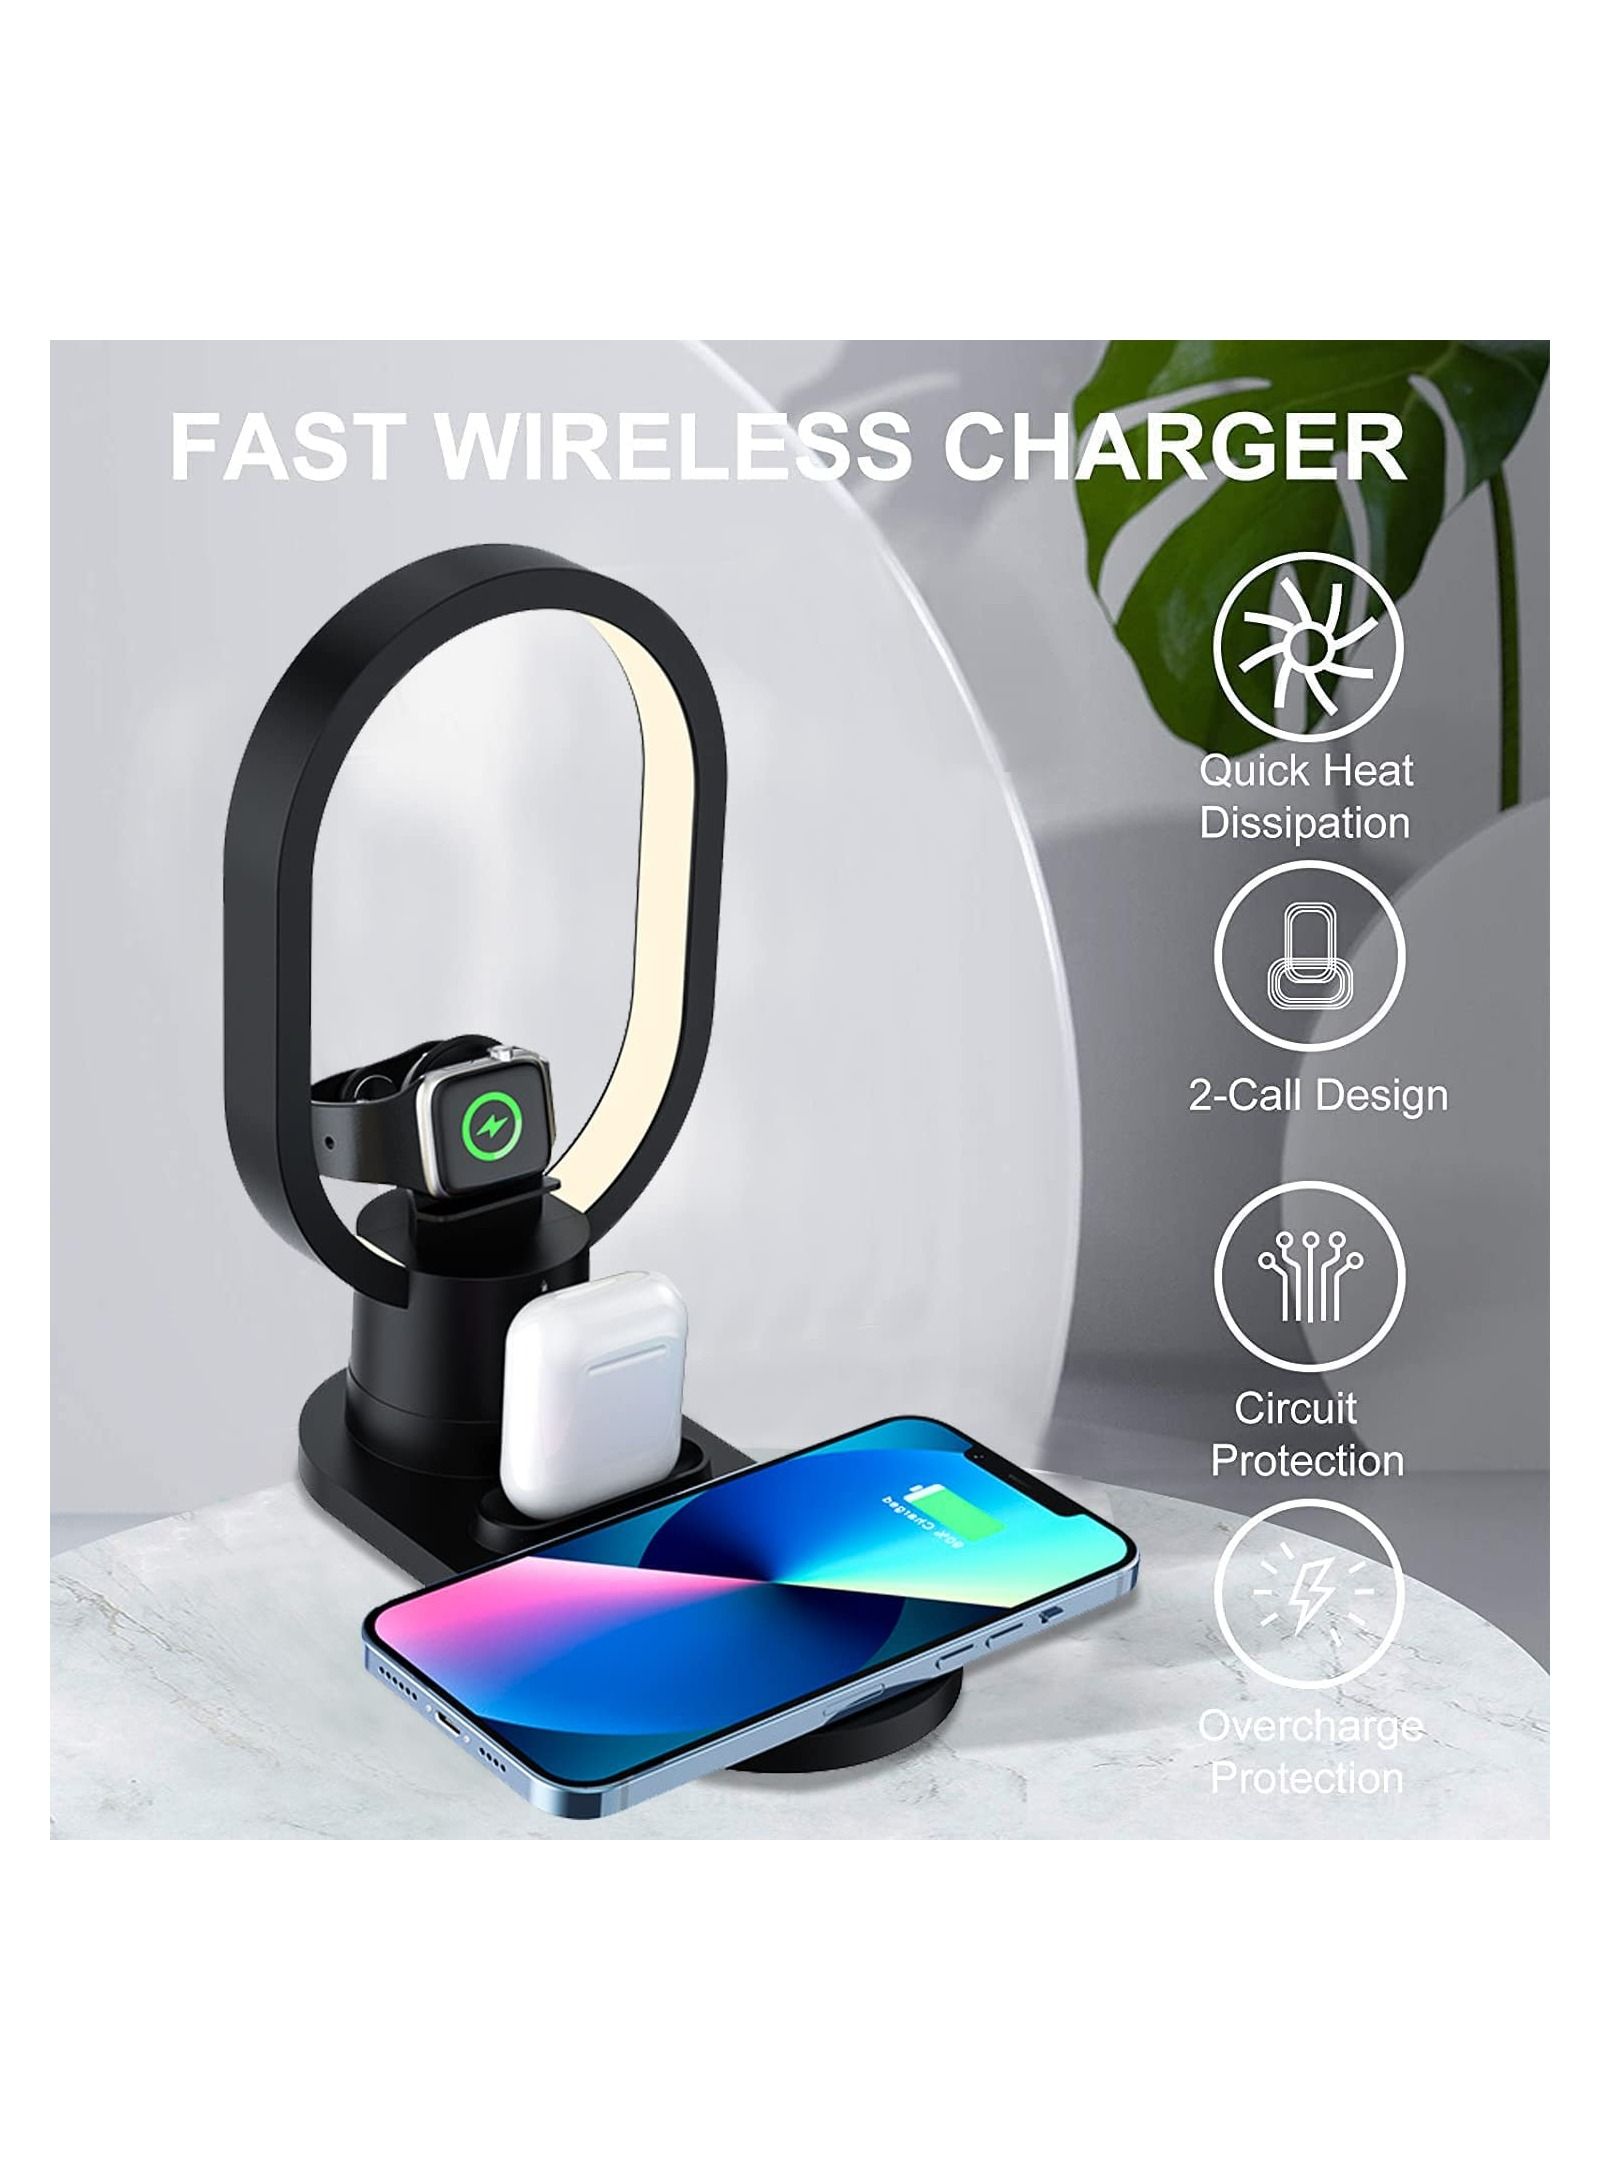 4 in 1 Fast Wireless Charger LED Desk Lamp, 15W Wireless Charging Station Desk Lamp with QC3.0 Adapter Compatible